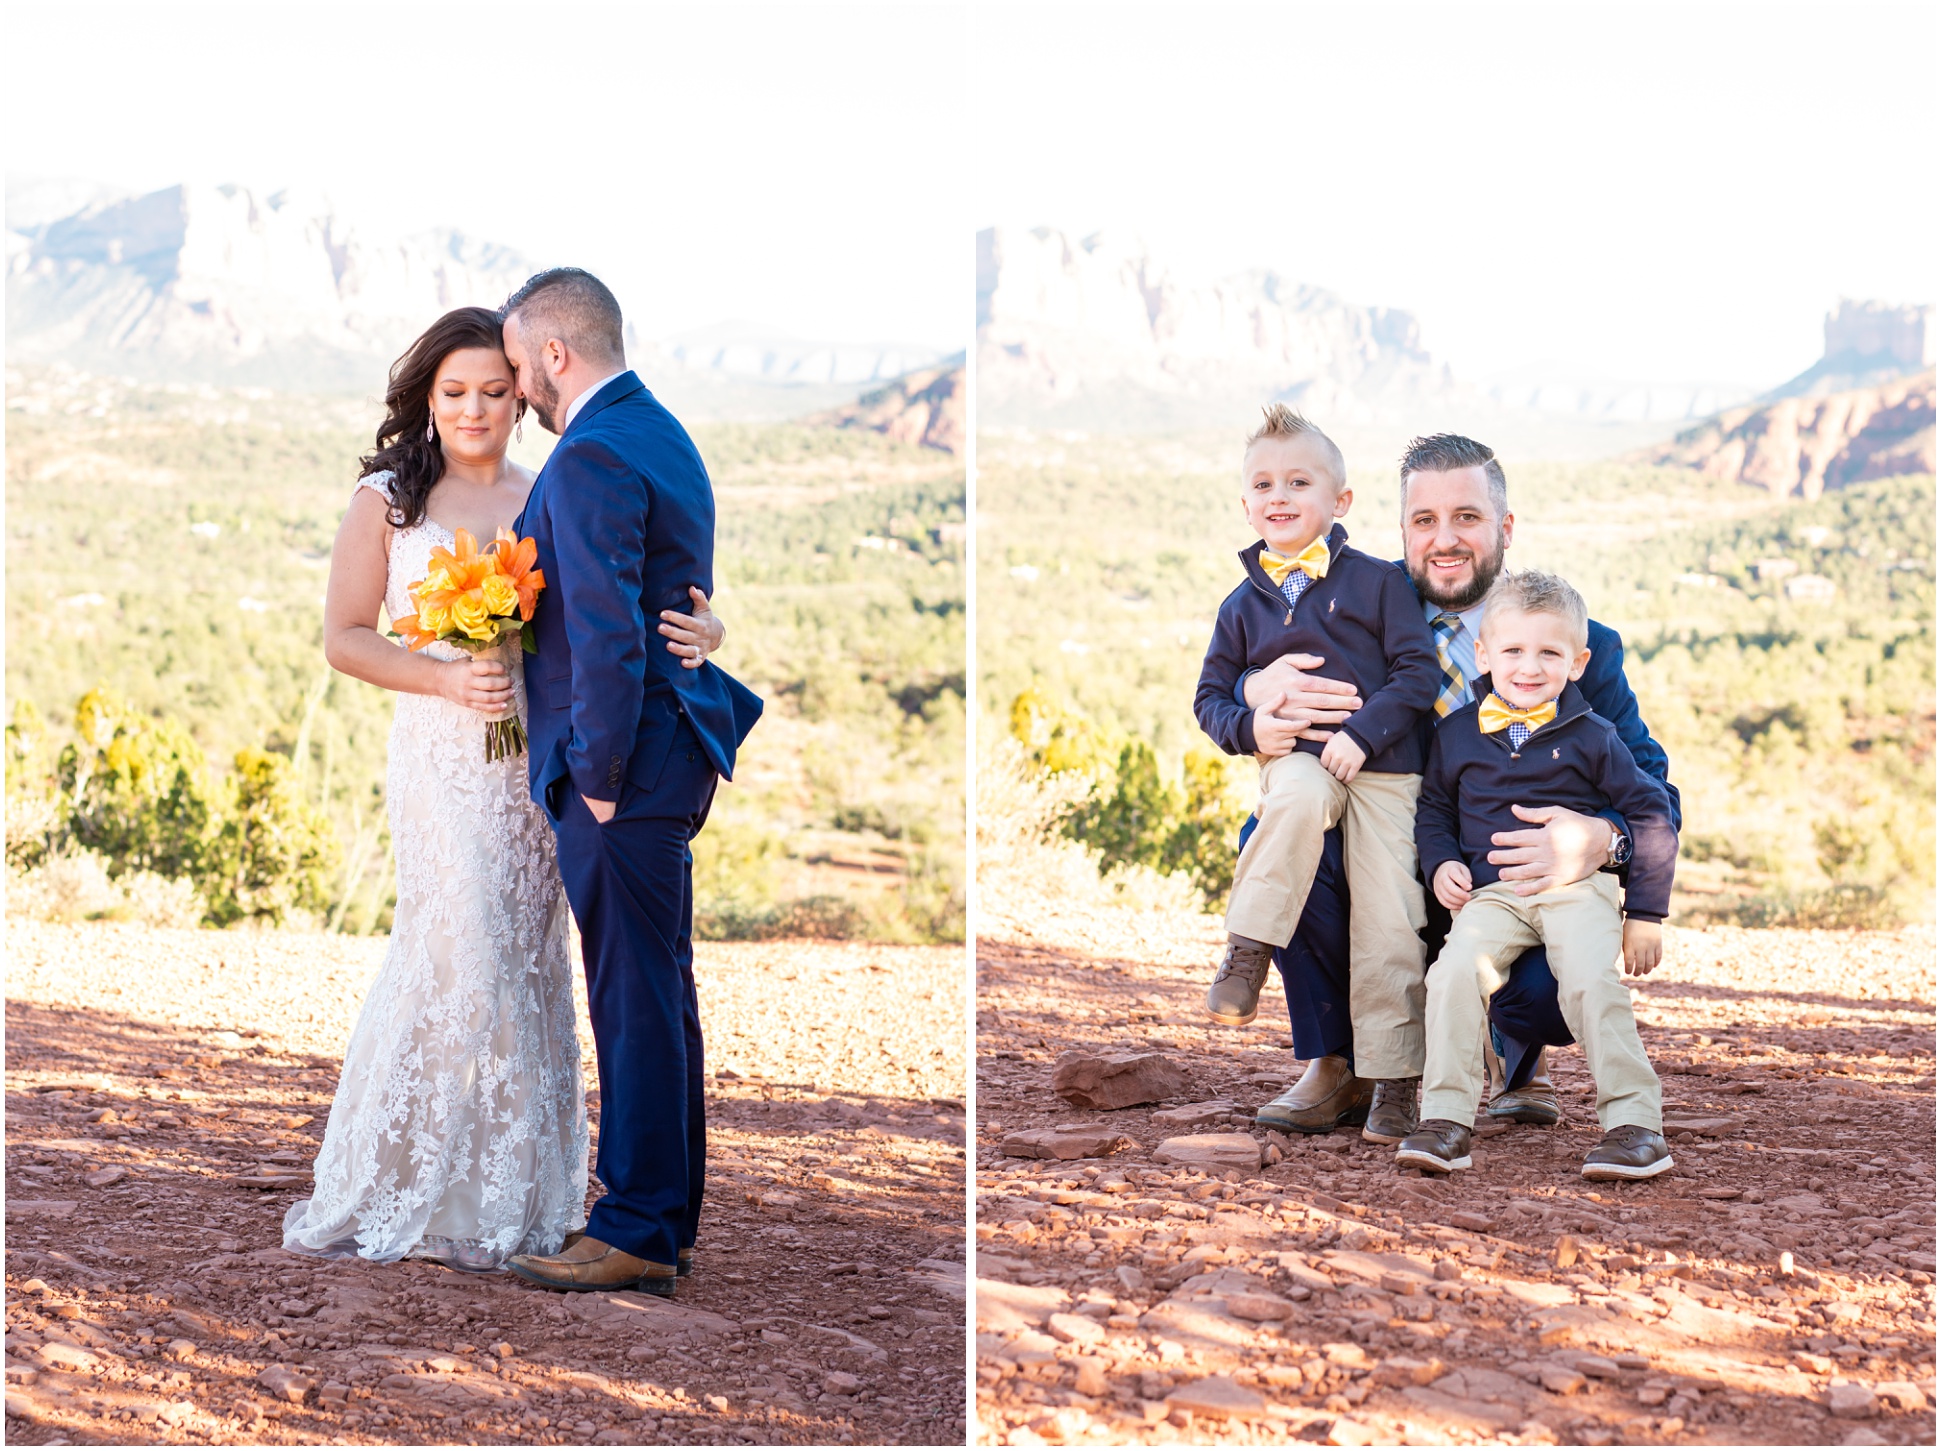 Bride and Groom Portrait for Tiffany and Anthony in Sedona. Bride wearing long white lace wedding gown, groom wearing blue suit with yellow and blue plaid tie.